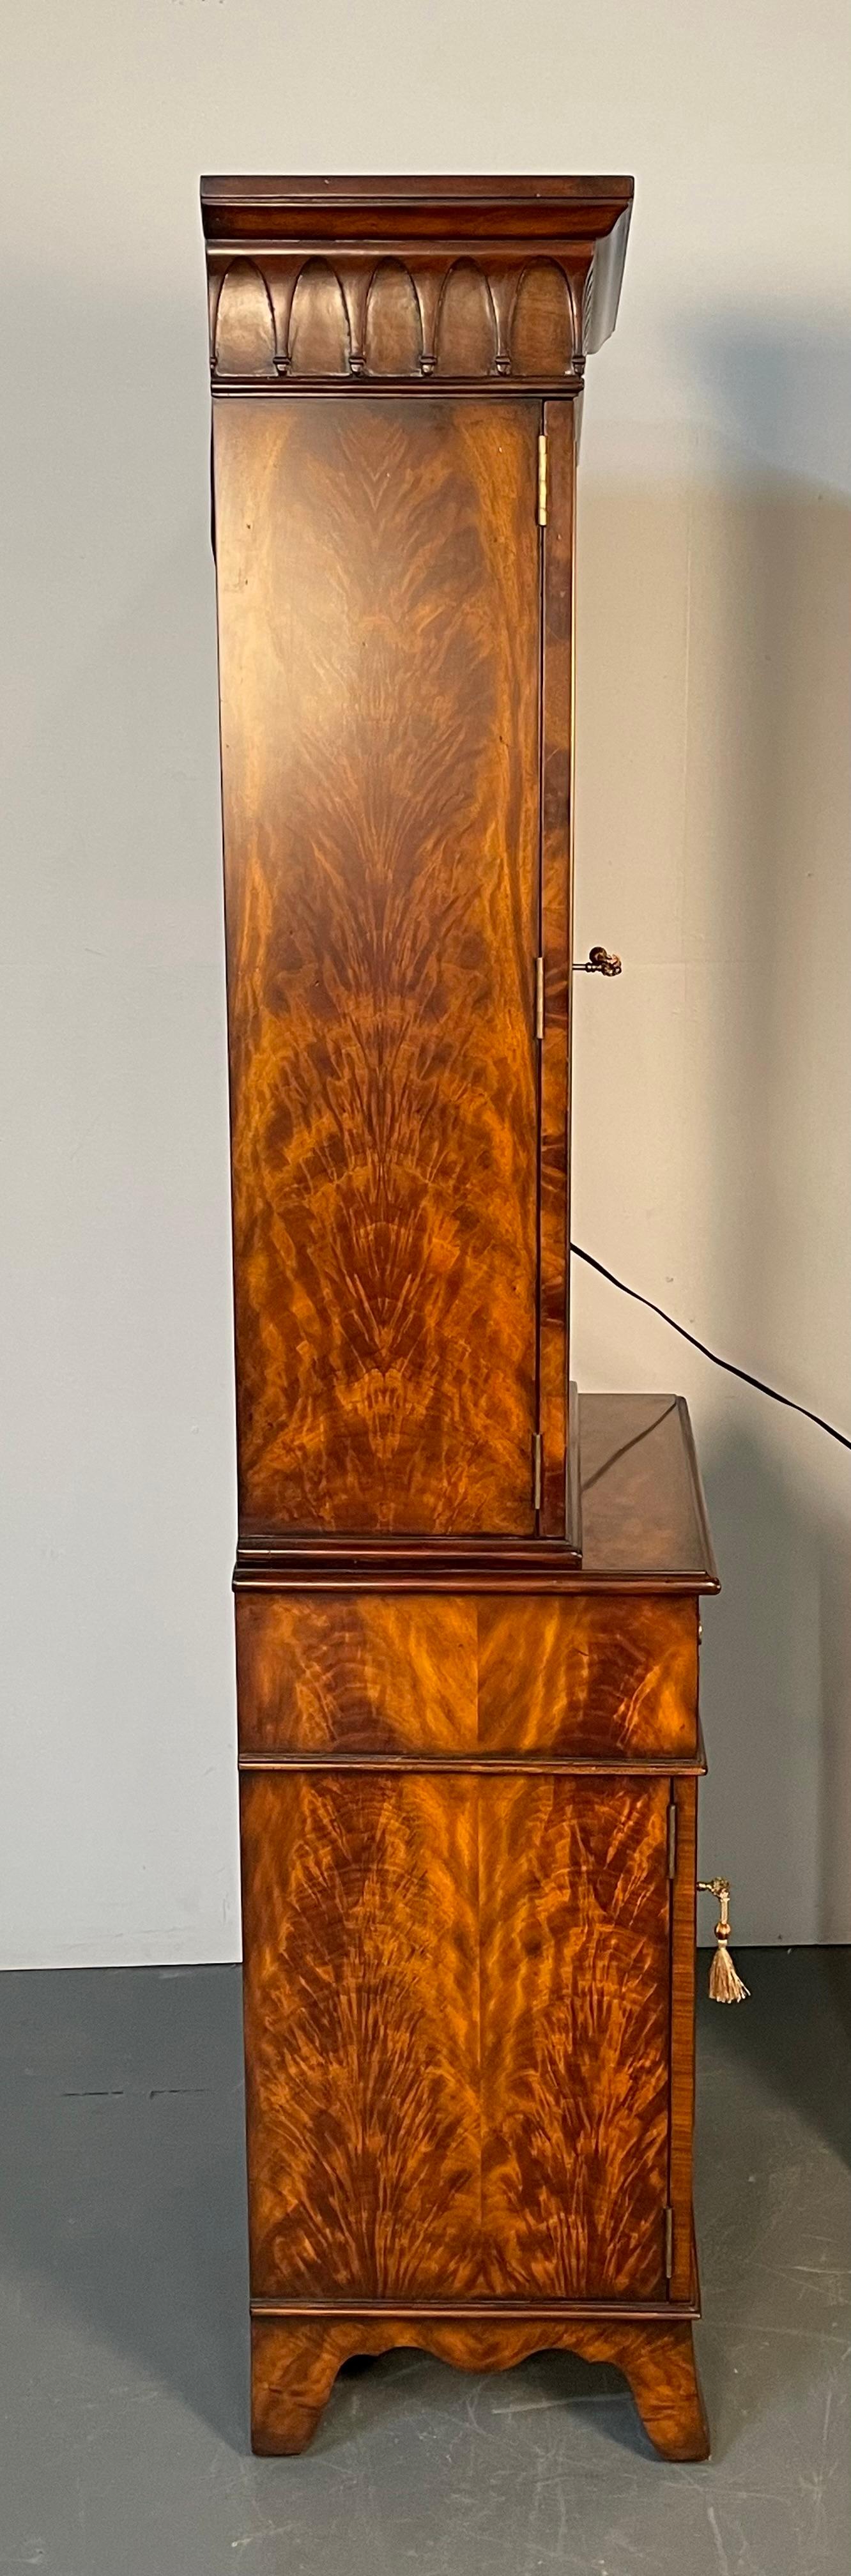 Theodore Alexander, Sheraton Style, Bookcases, Flame Mahogany, Glass, 1970s For Sale 2